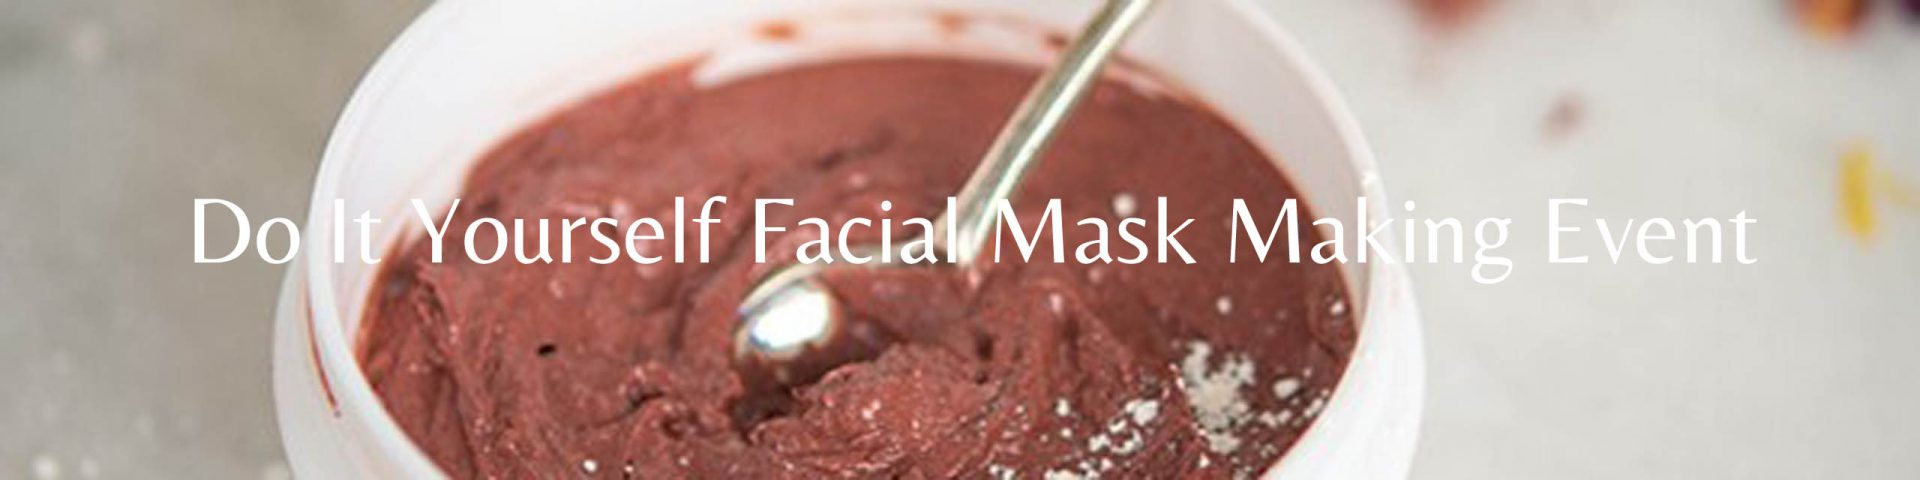 Do It Yourself facial mask mix surrounded by natural ingredients from DIY event in Duluth